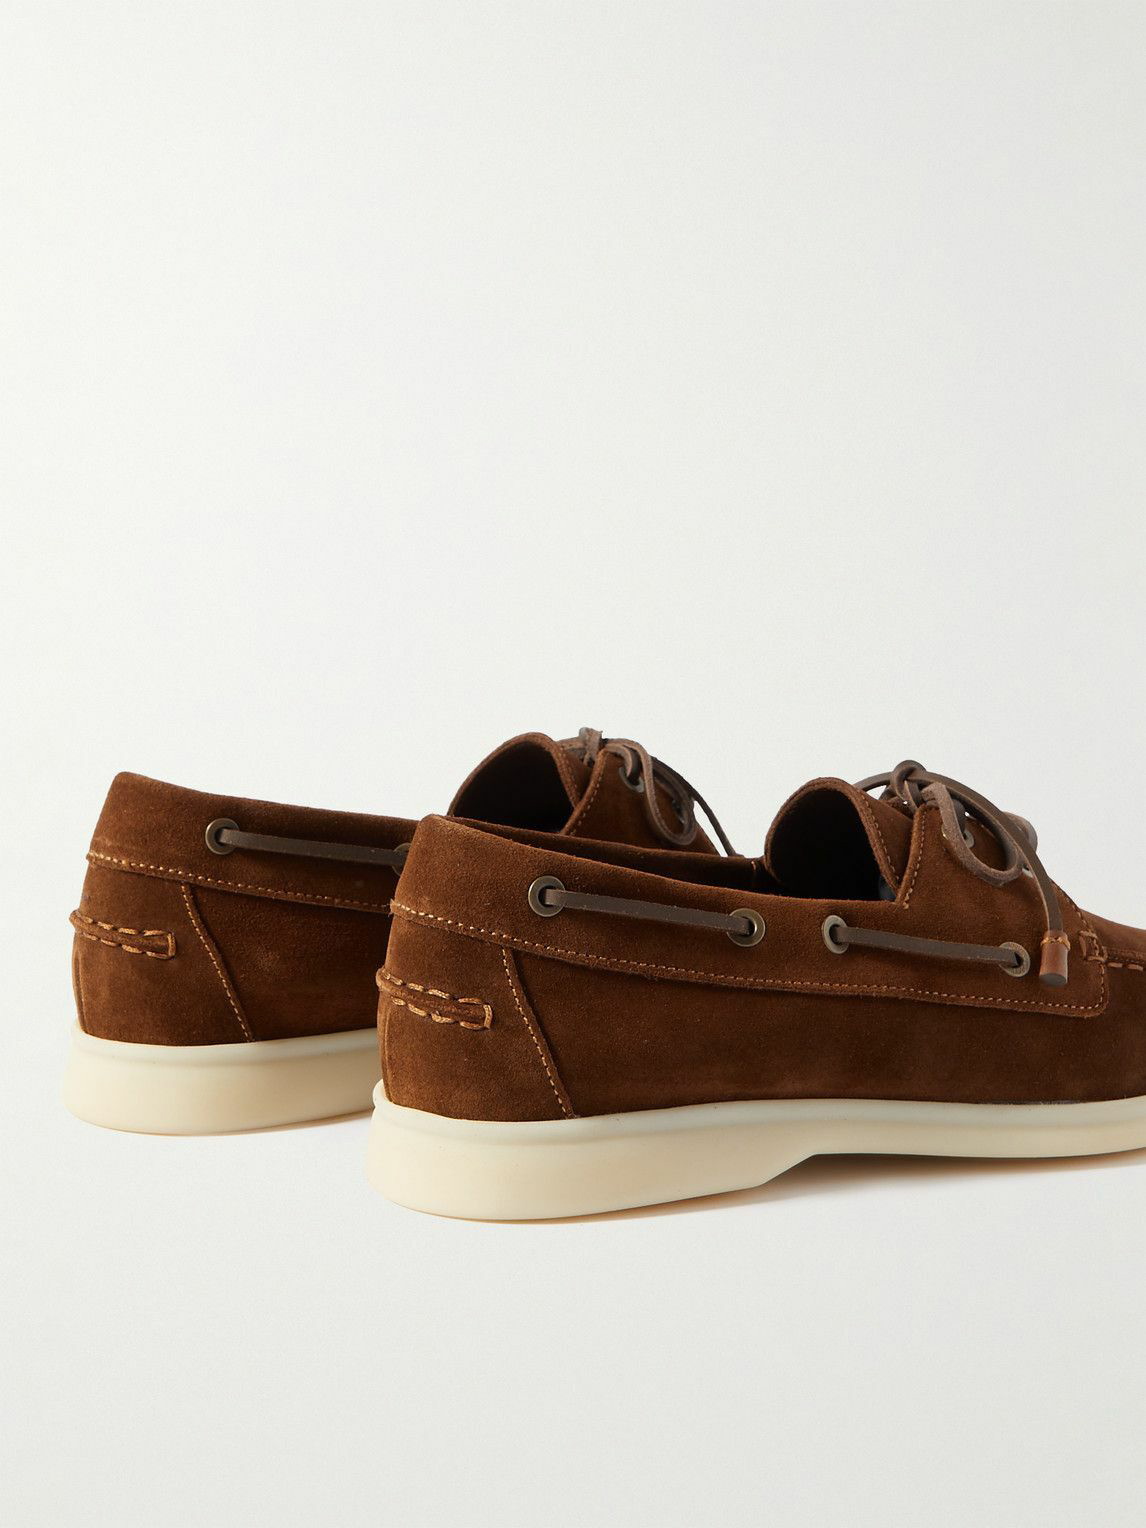 Loro Piana - Sea-Sail Walk Leather-Trimmed Suede Boat Shoes - Brown ...